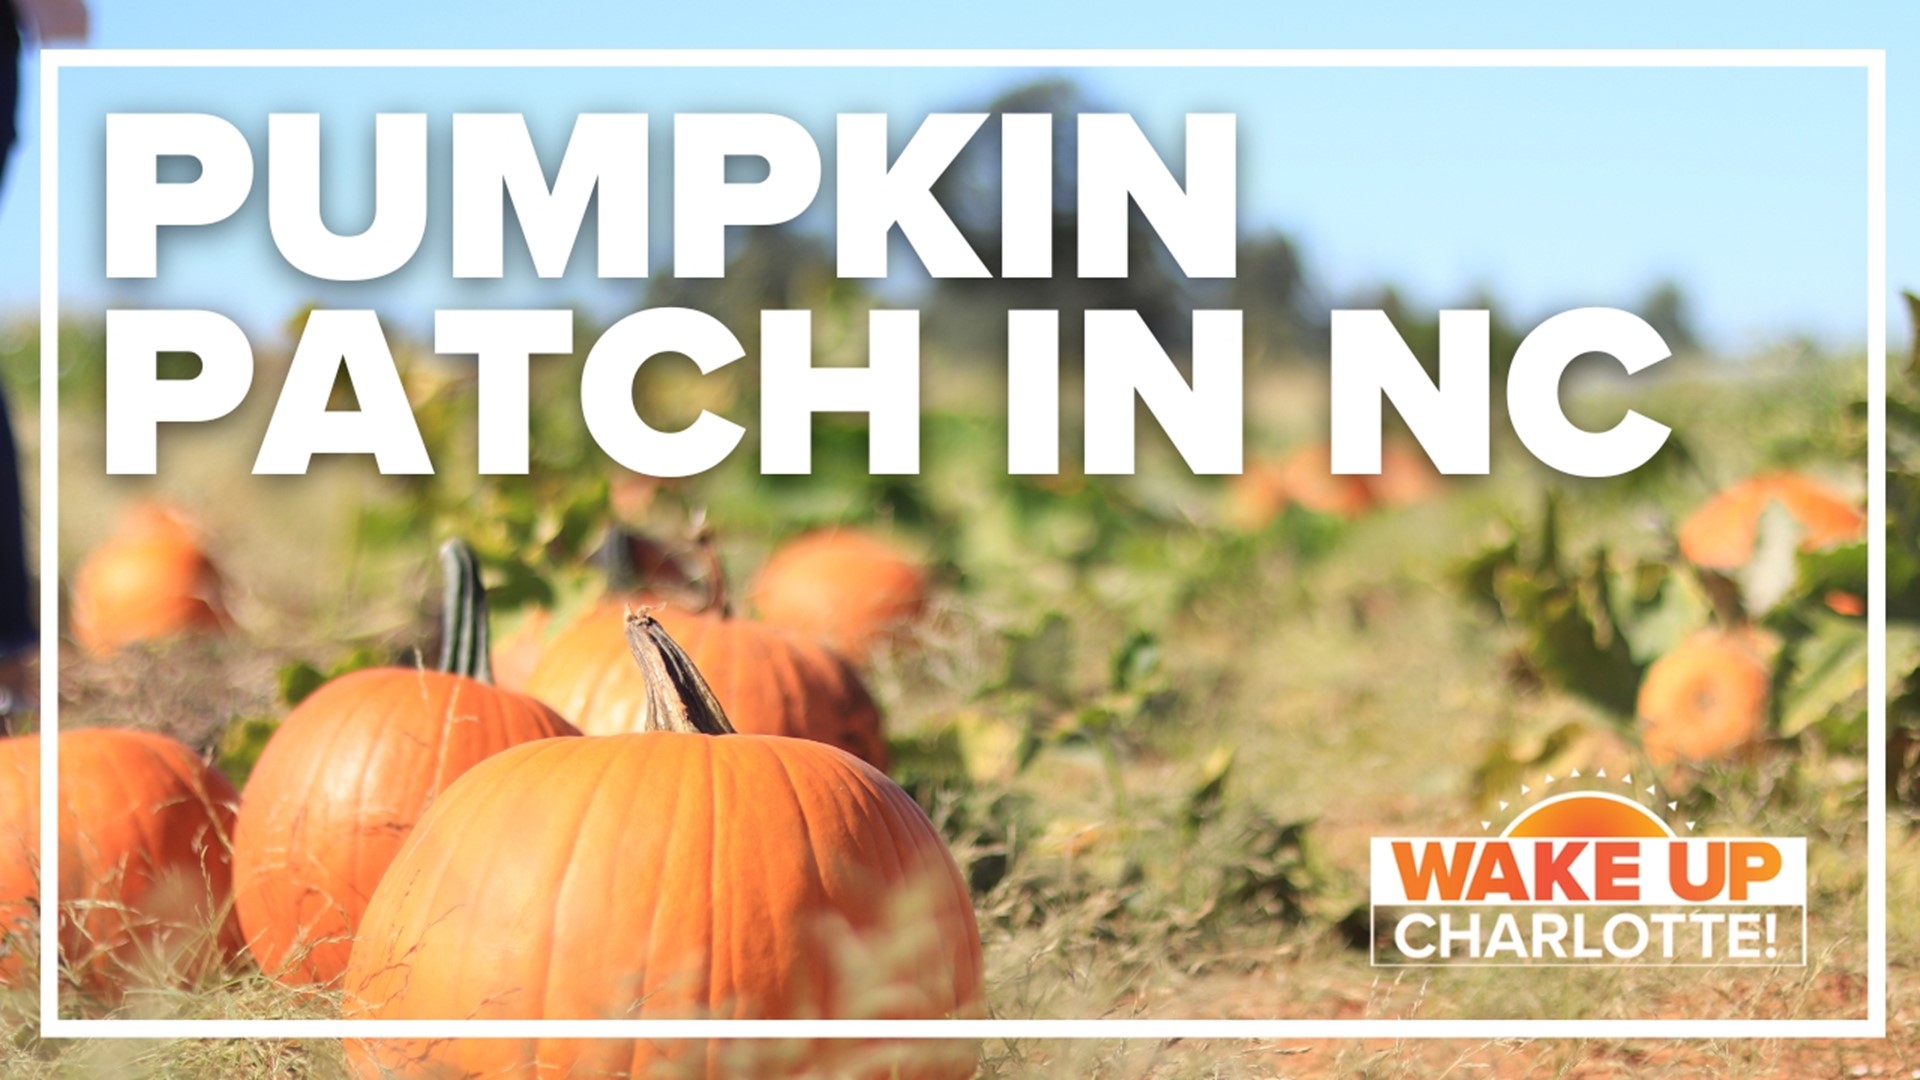 You can find pumpkin patches pretty much anywhere across our area, but one patch, in particular, is making a difference.